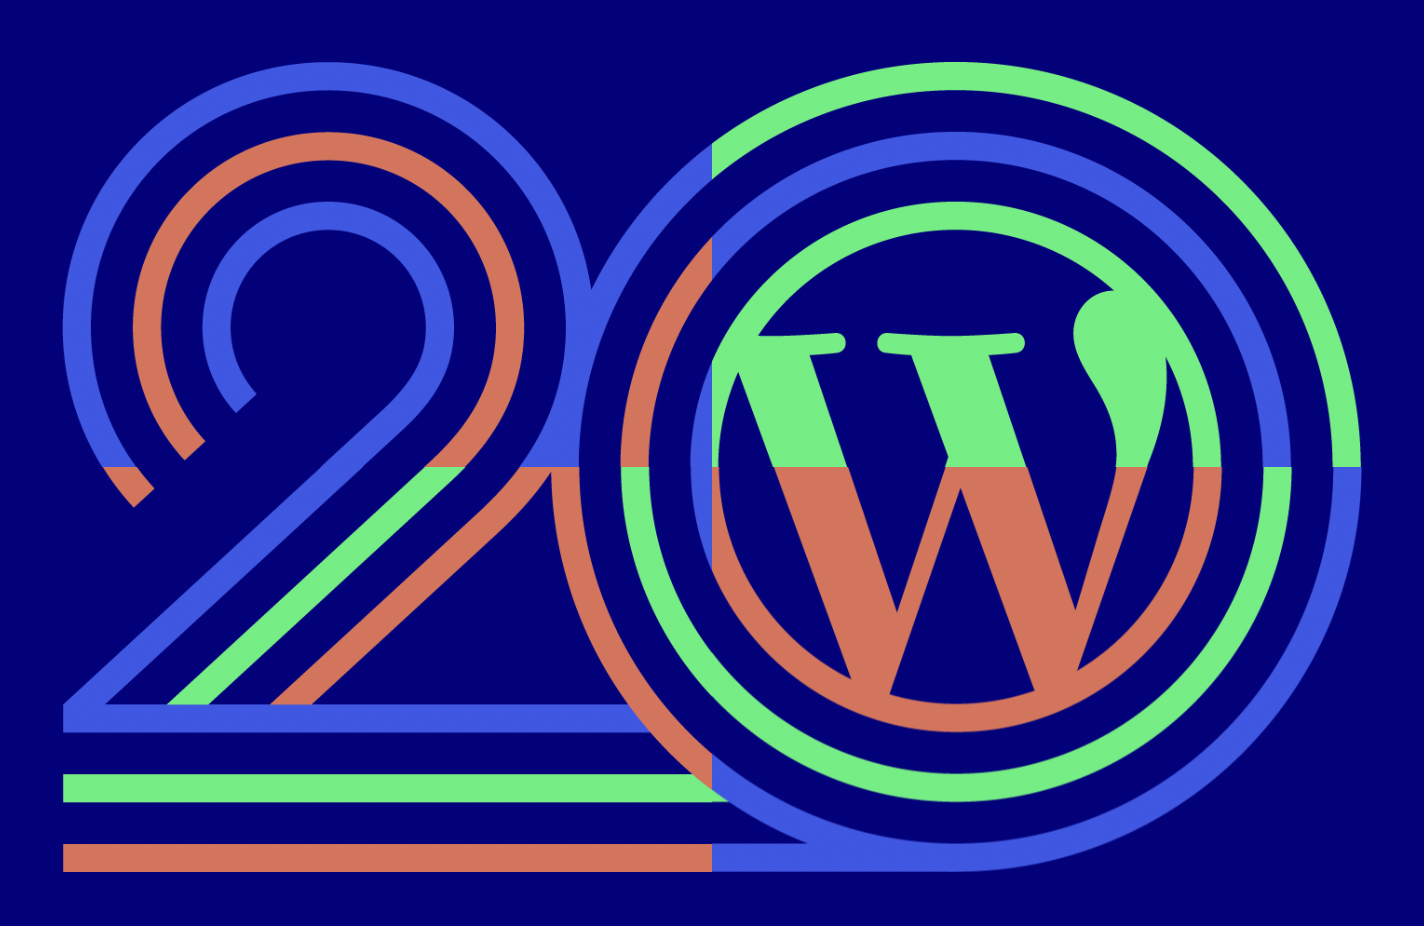 20 with a WordPress logo inside the zero in a colorful array, divided into four squares with a shared color combination.